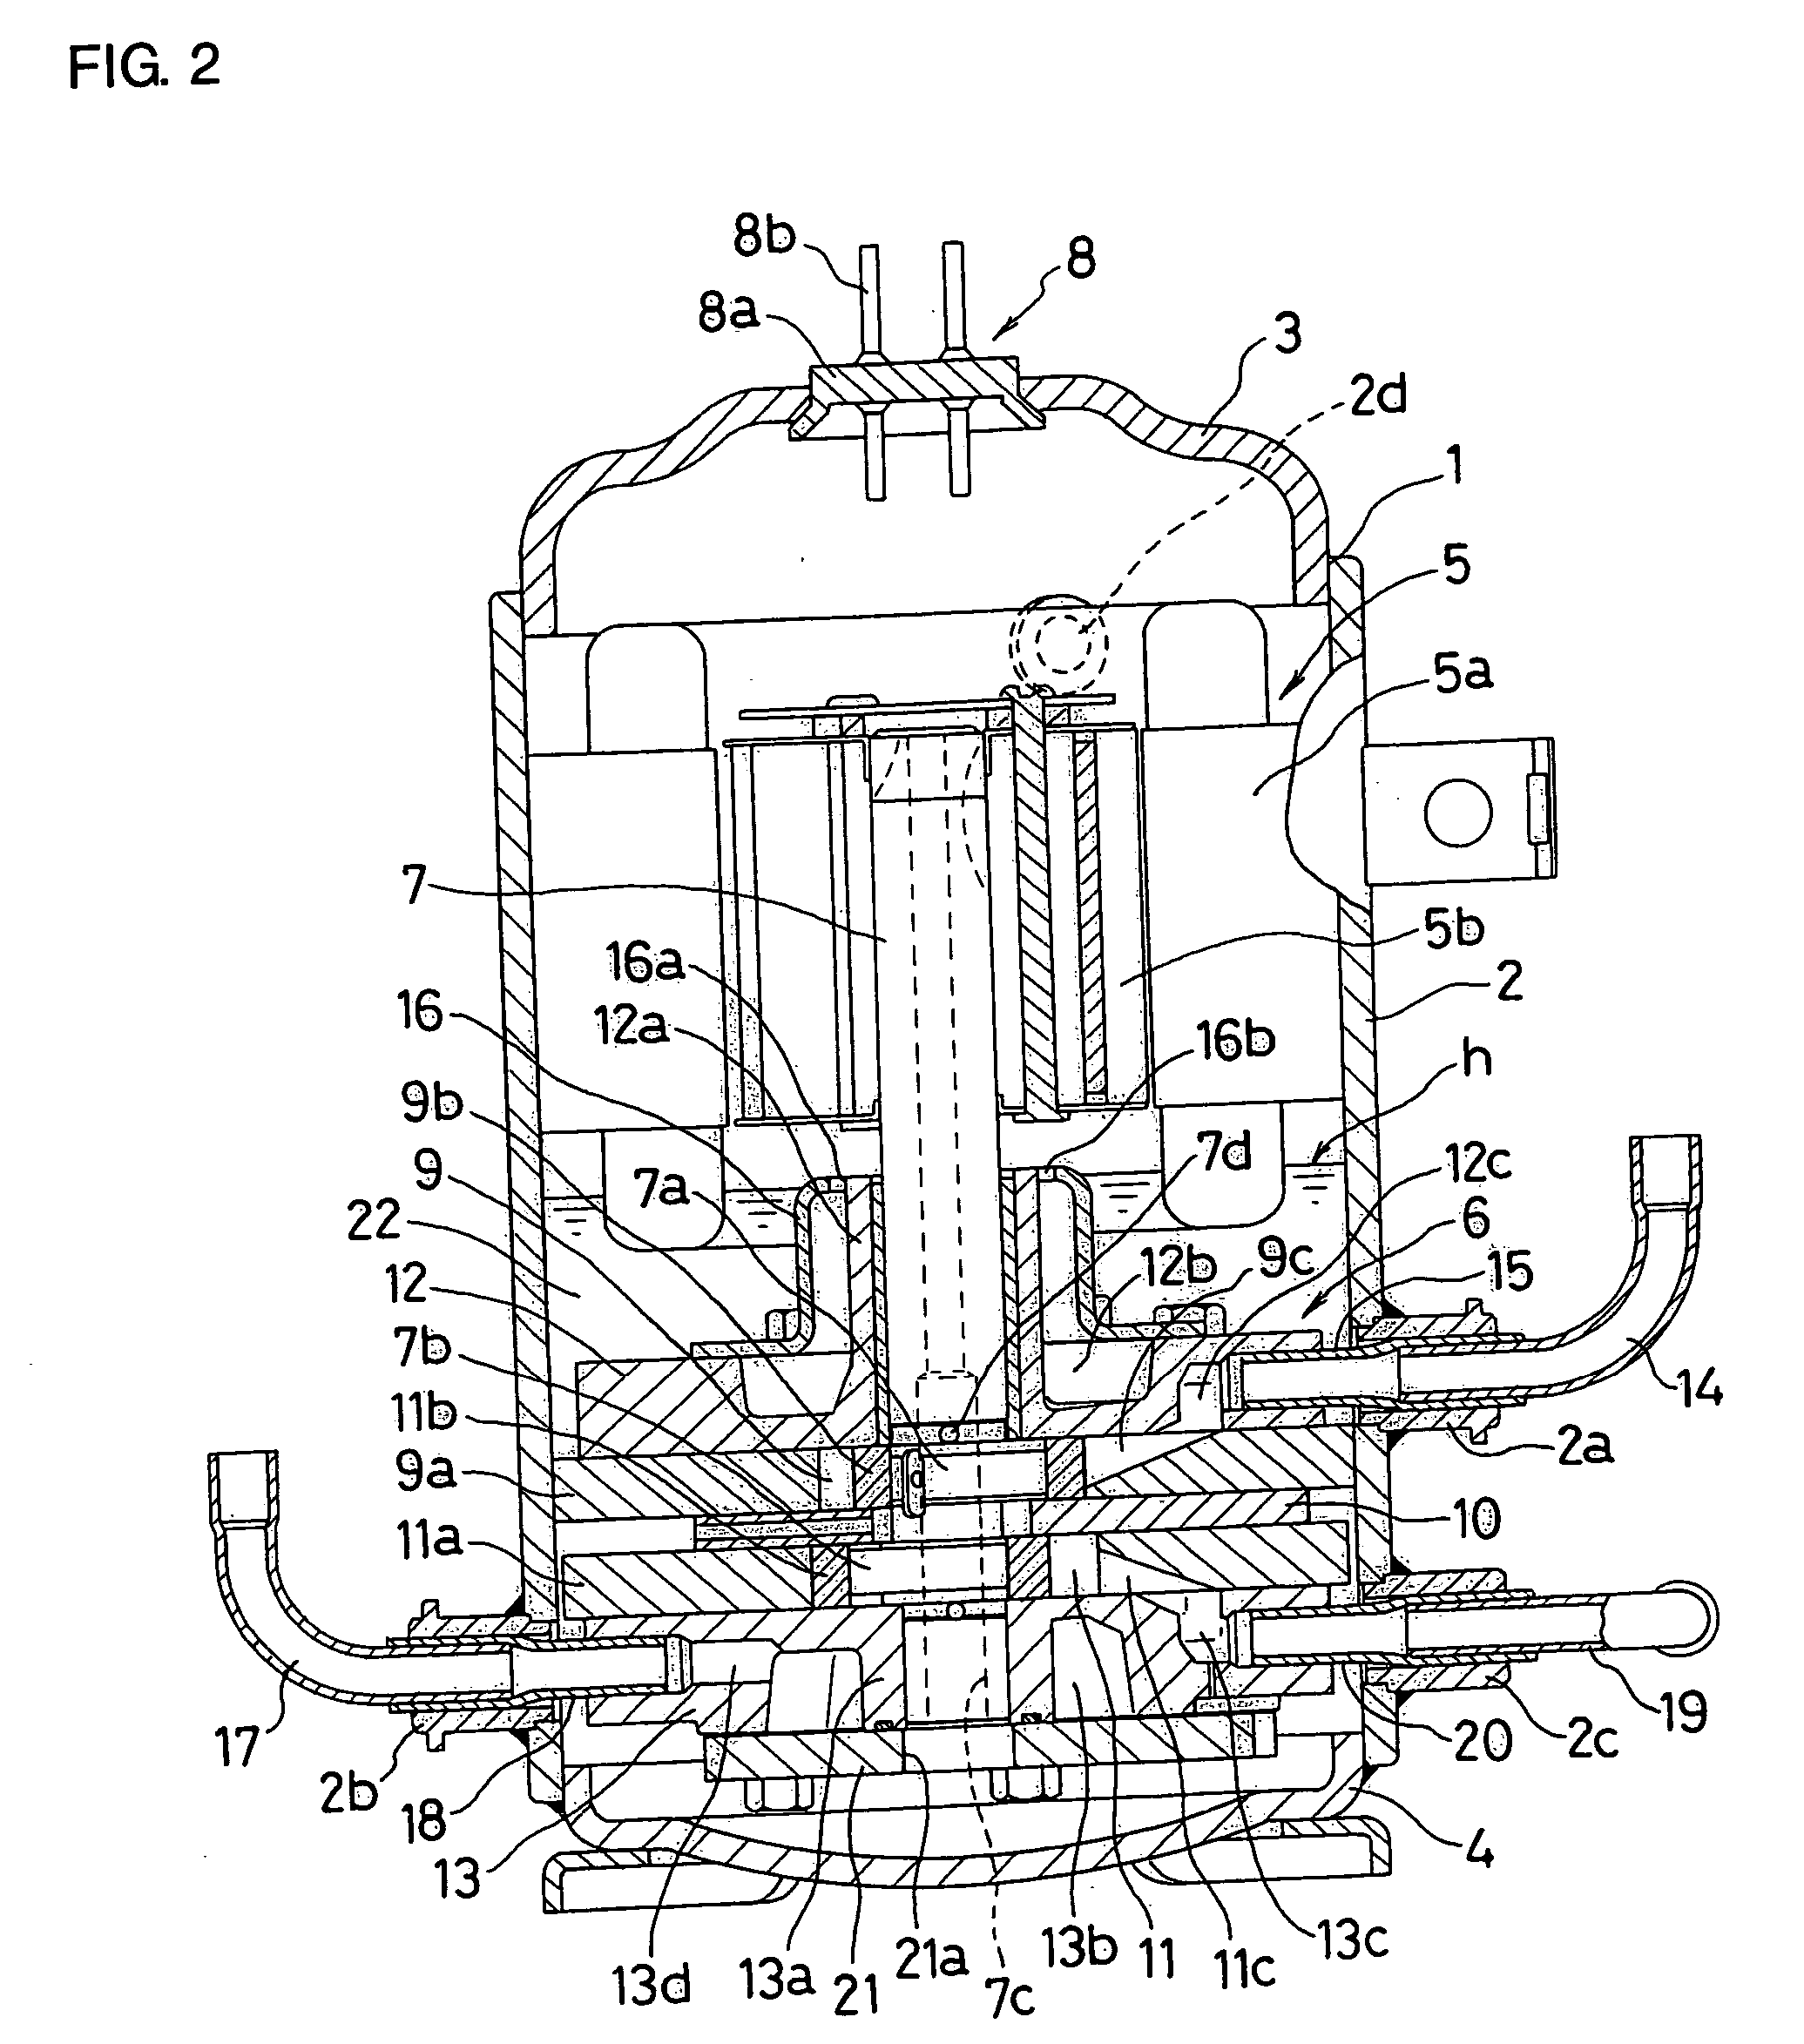 Multistage rotary compressor